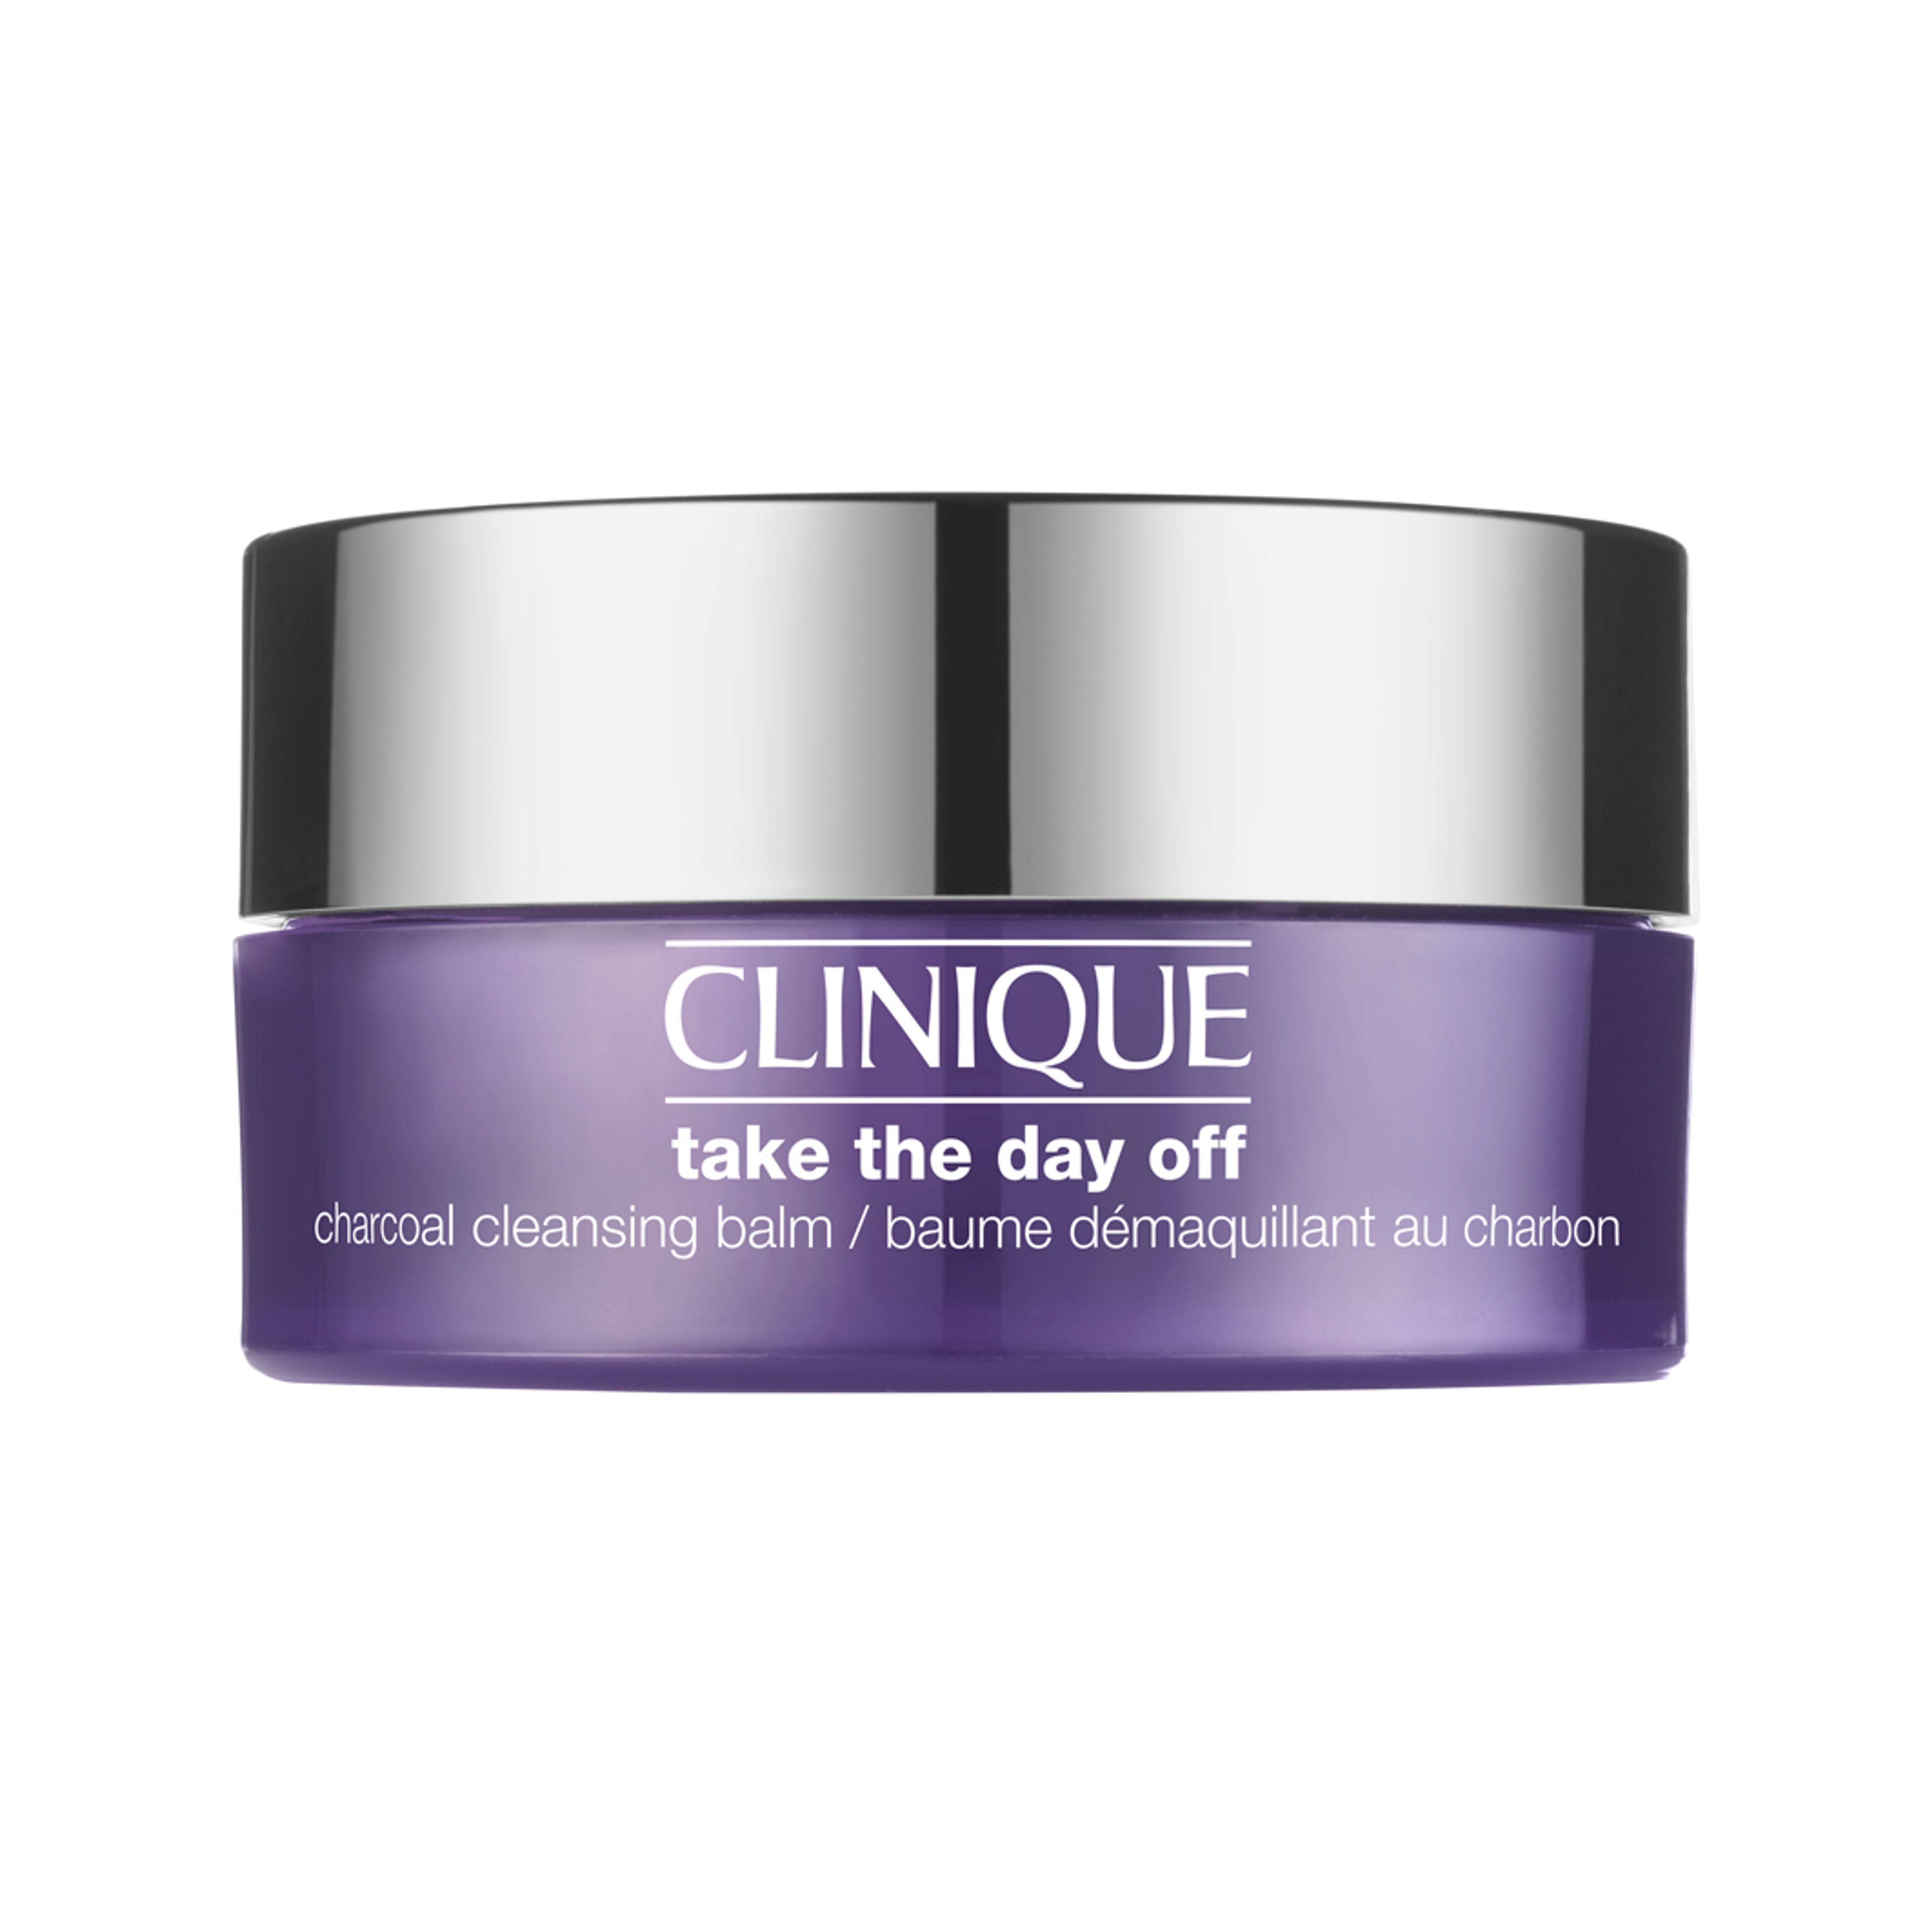 Clinique Take The Day Off™ Charcoal Cleansing Balm 1